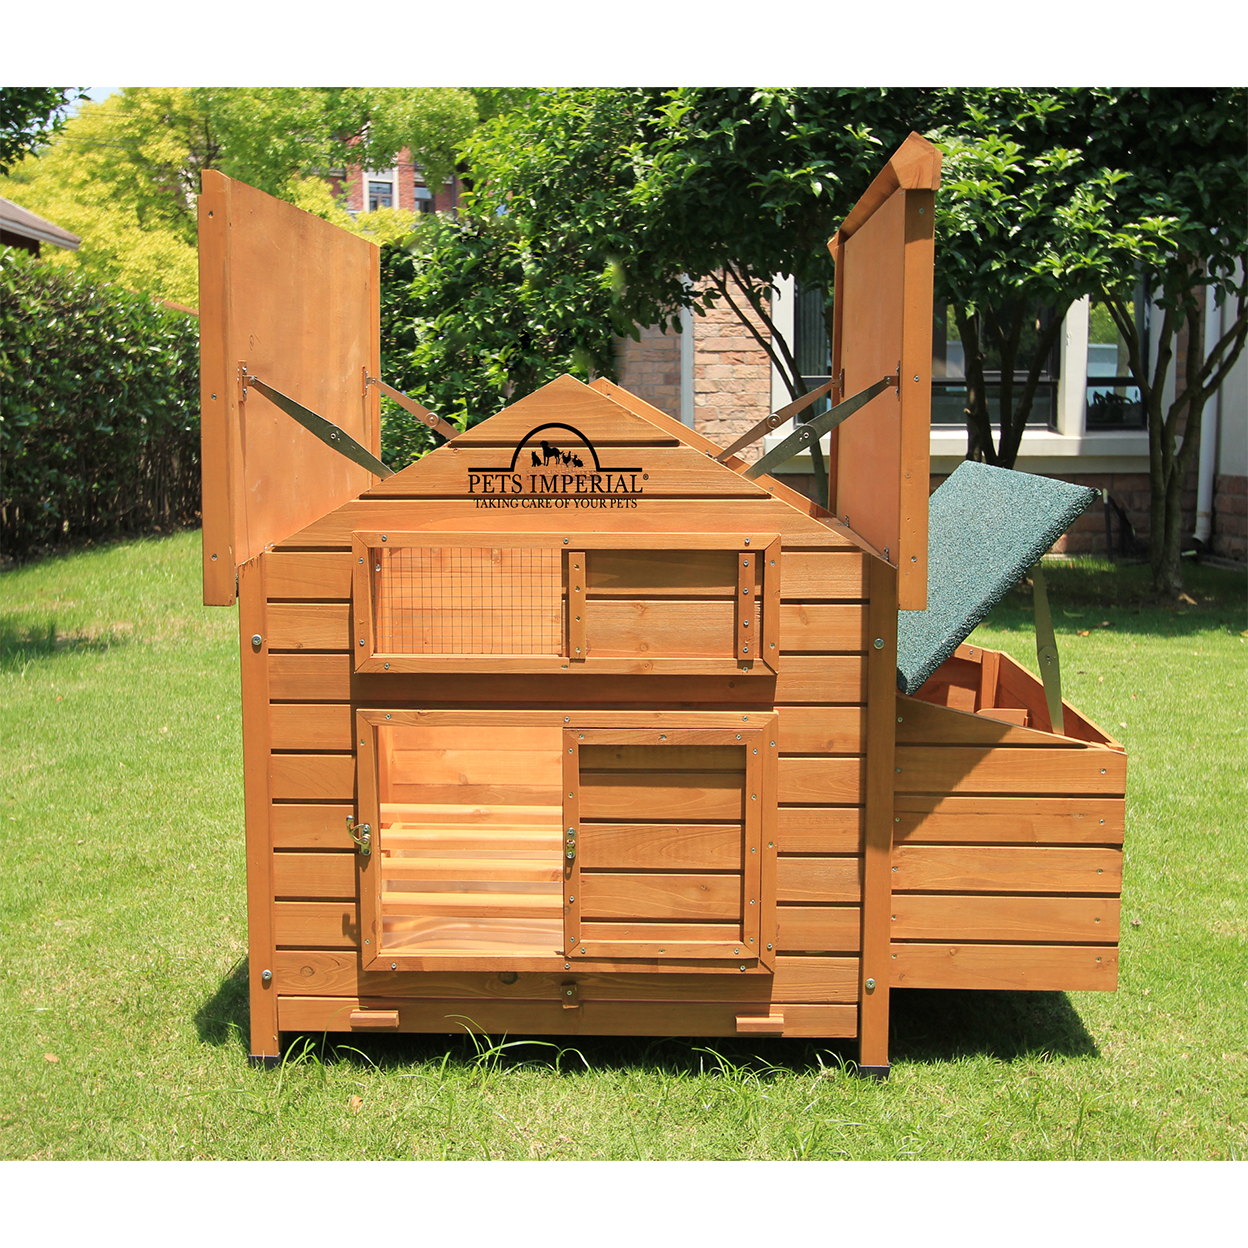 Pets Imperial Single Savoy Large Chicken Coop With Nest Box Suitable For Up To 6 Birds Depending On Size